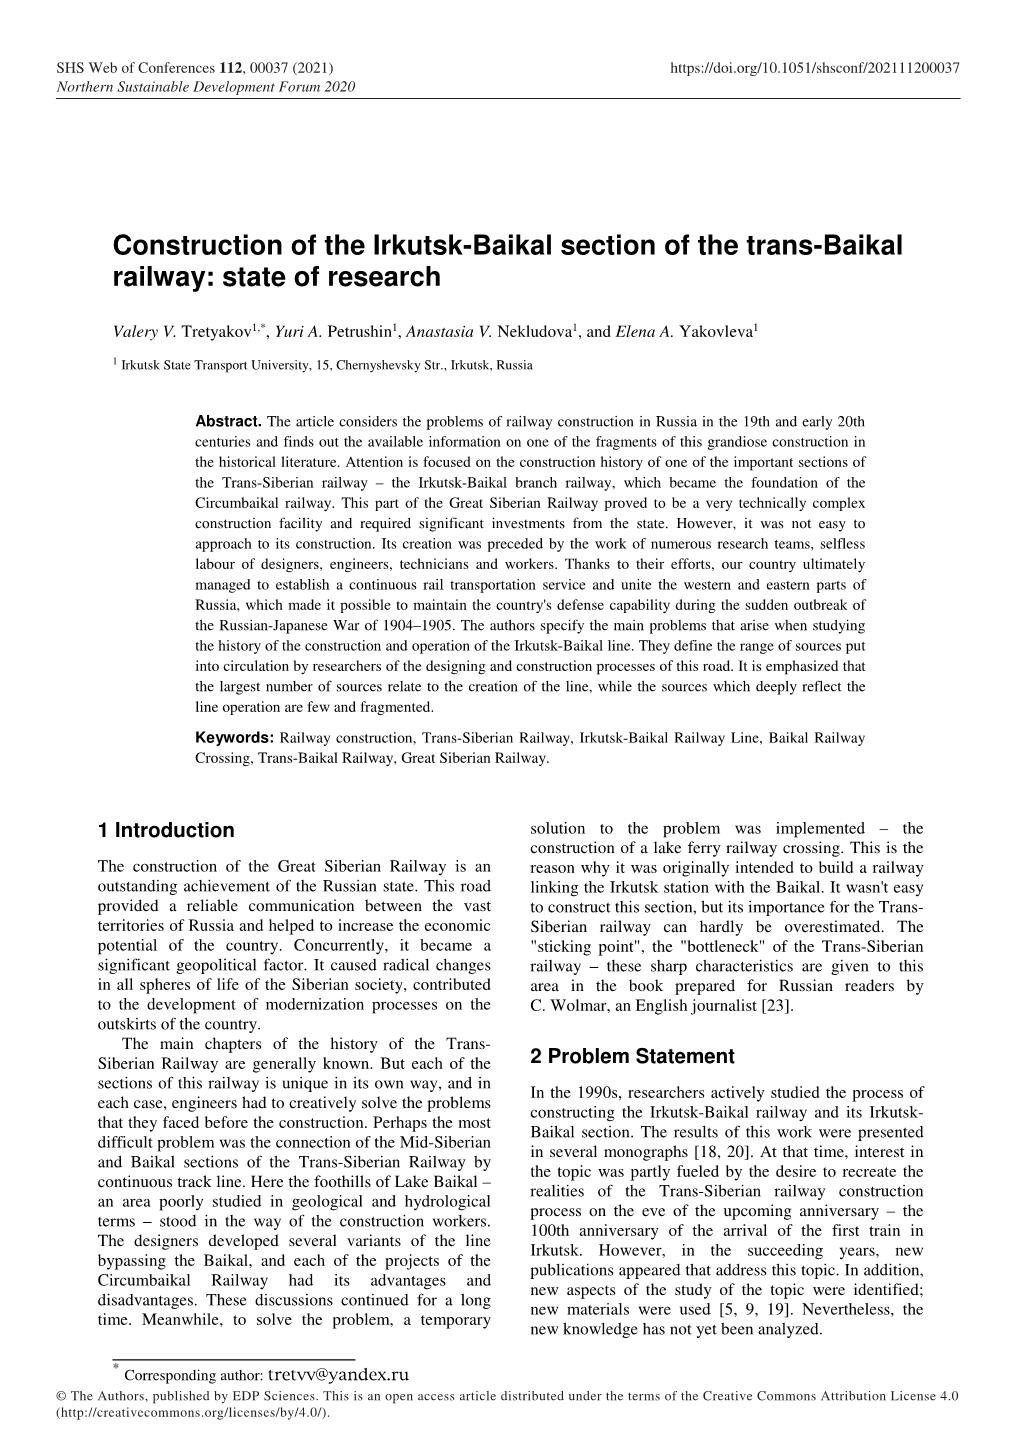 Construction of the Irkutsk-Baikal Section of the Trans-Baikal Railway: State of Research